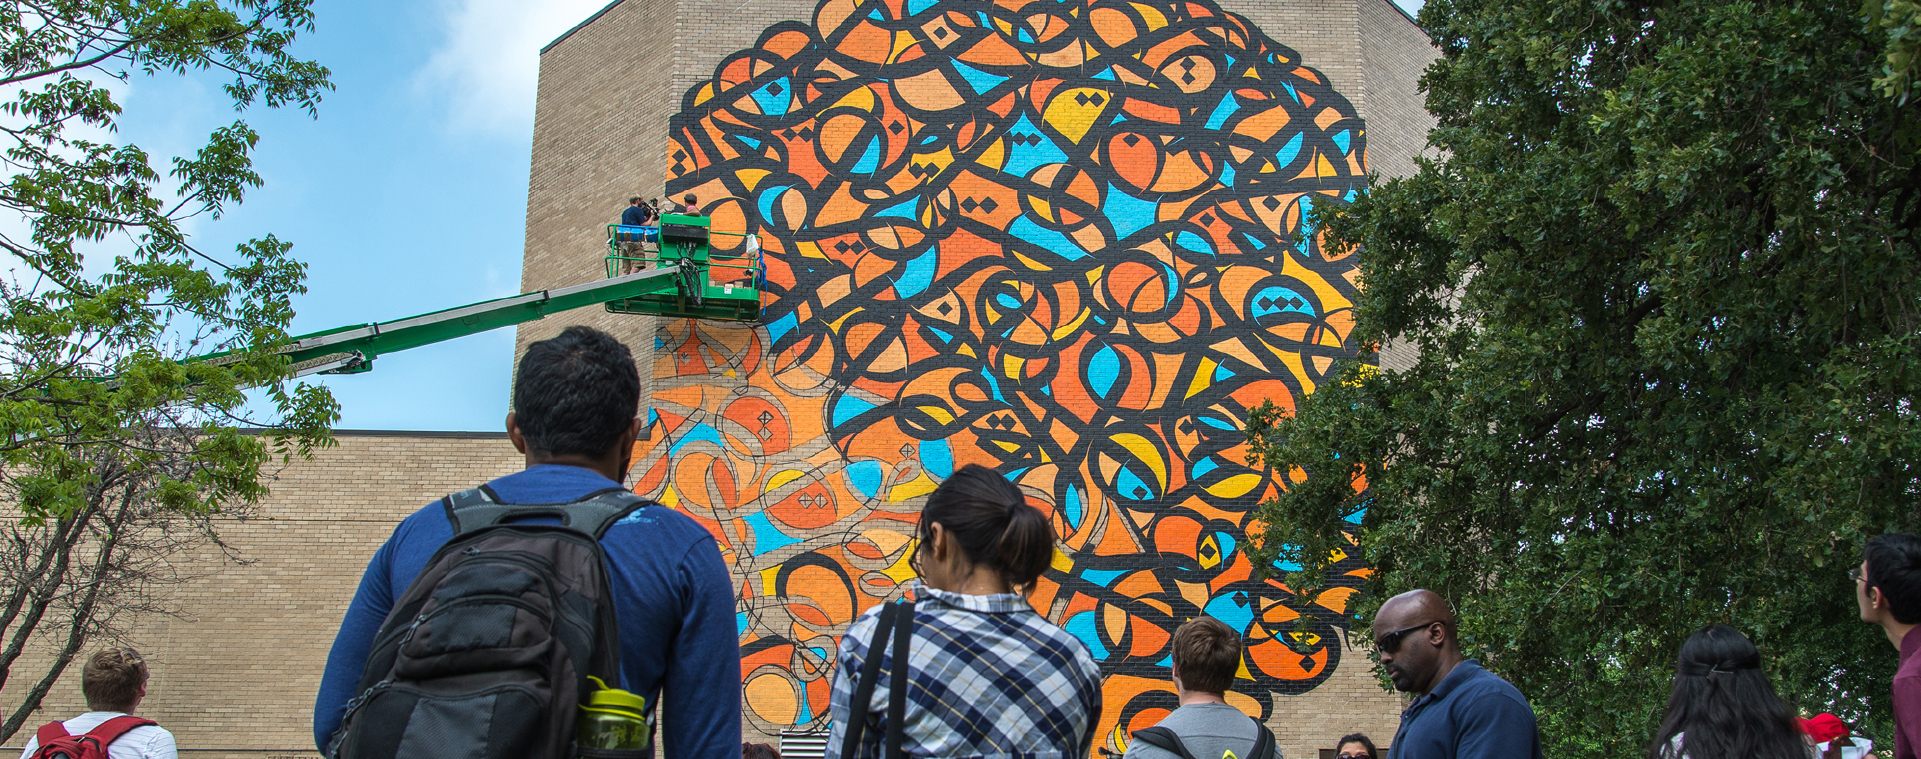 Two people in a lift paint a large orange, blue and black calligraphic mural on the side of a several-story high brown brick building while onlookers watch from below.